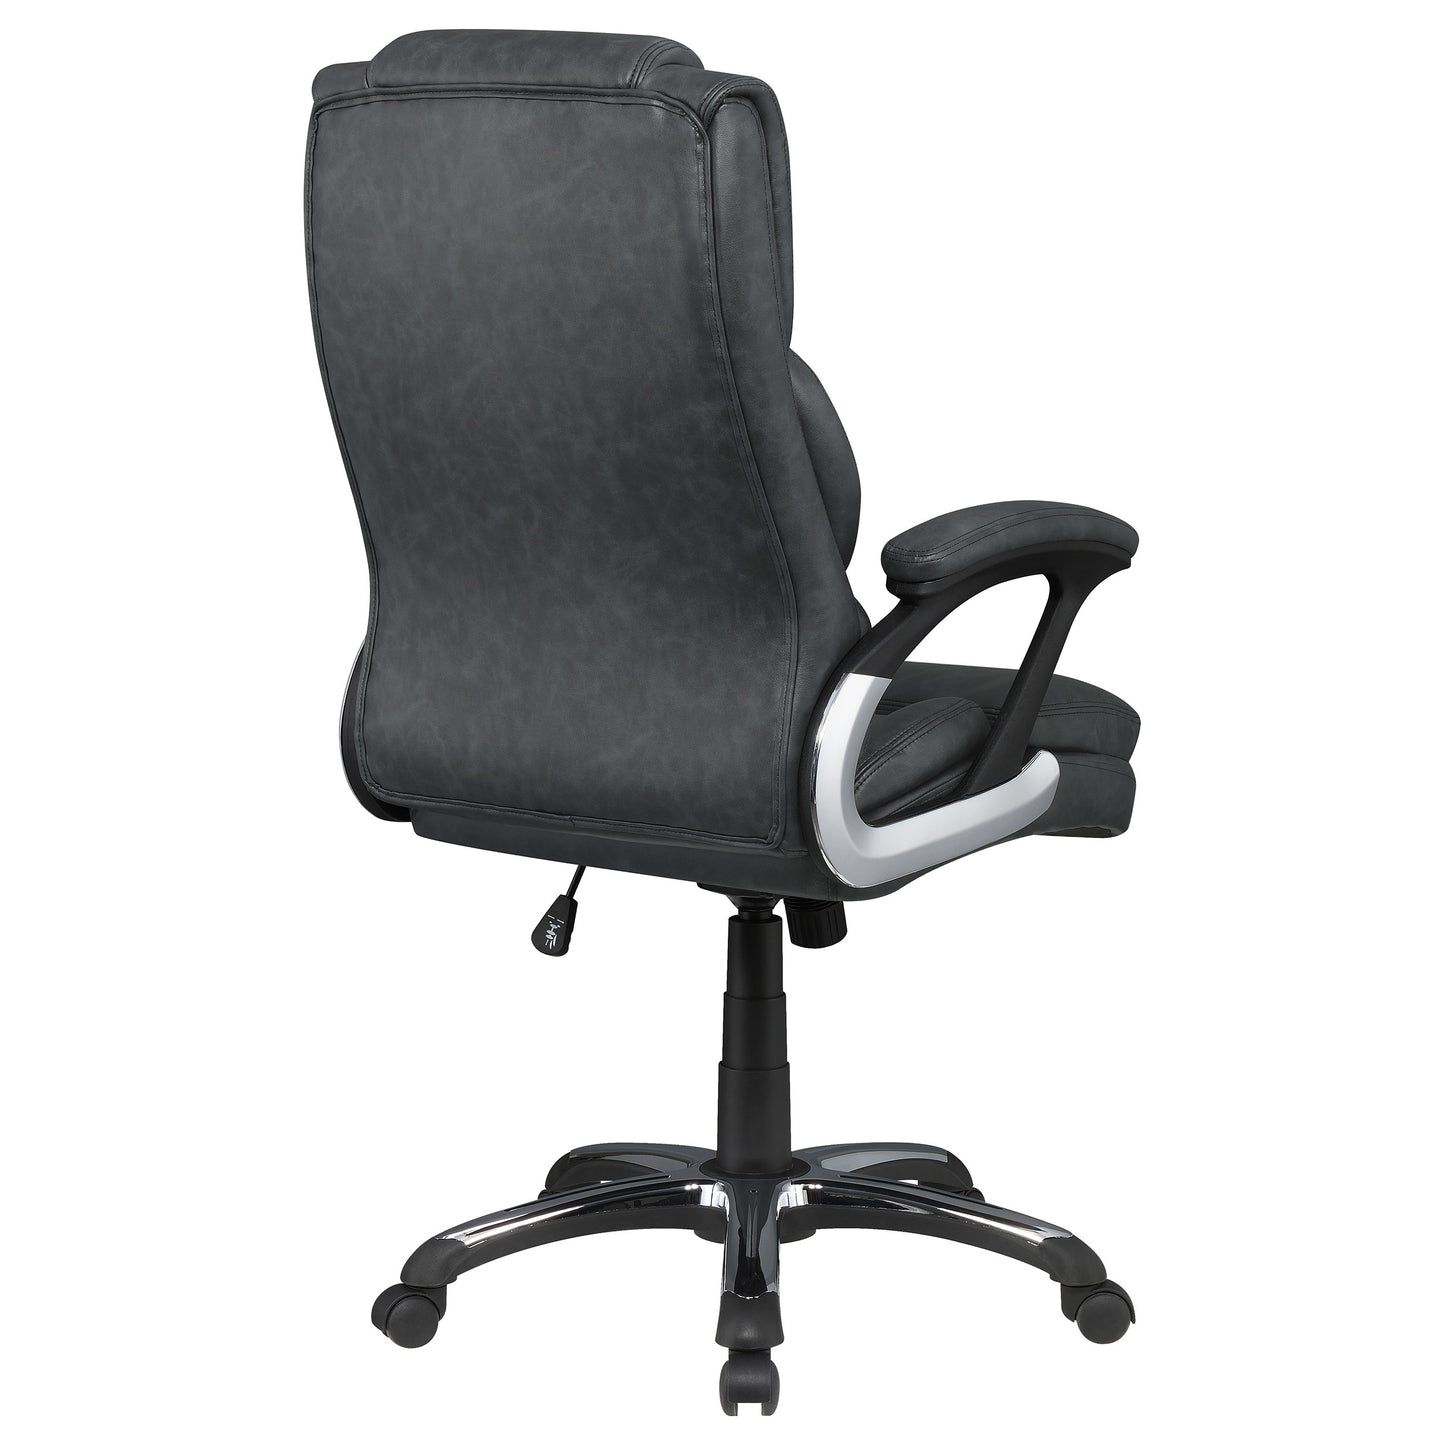 Nerris Adjustable Height Office Chair with Padded Arm Grey and Black